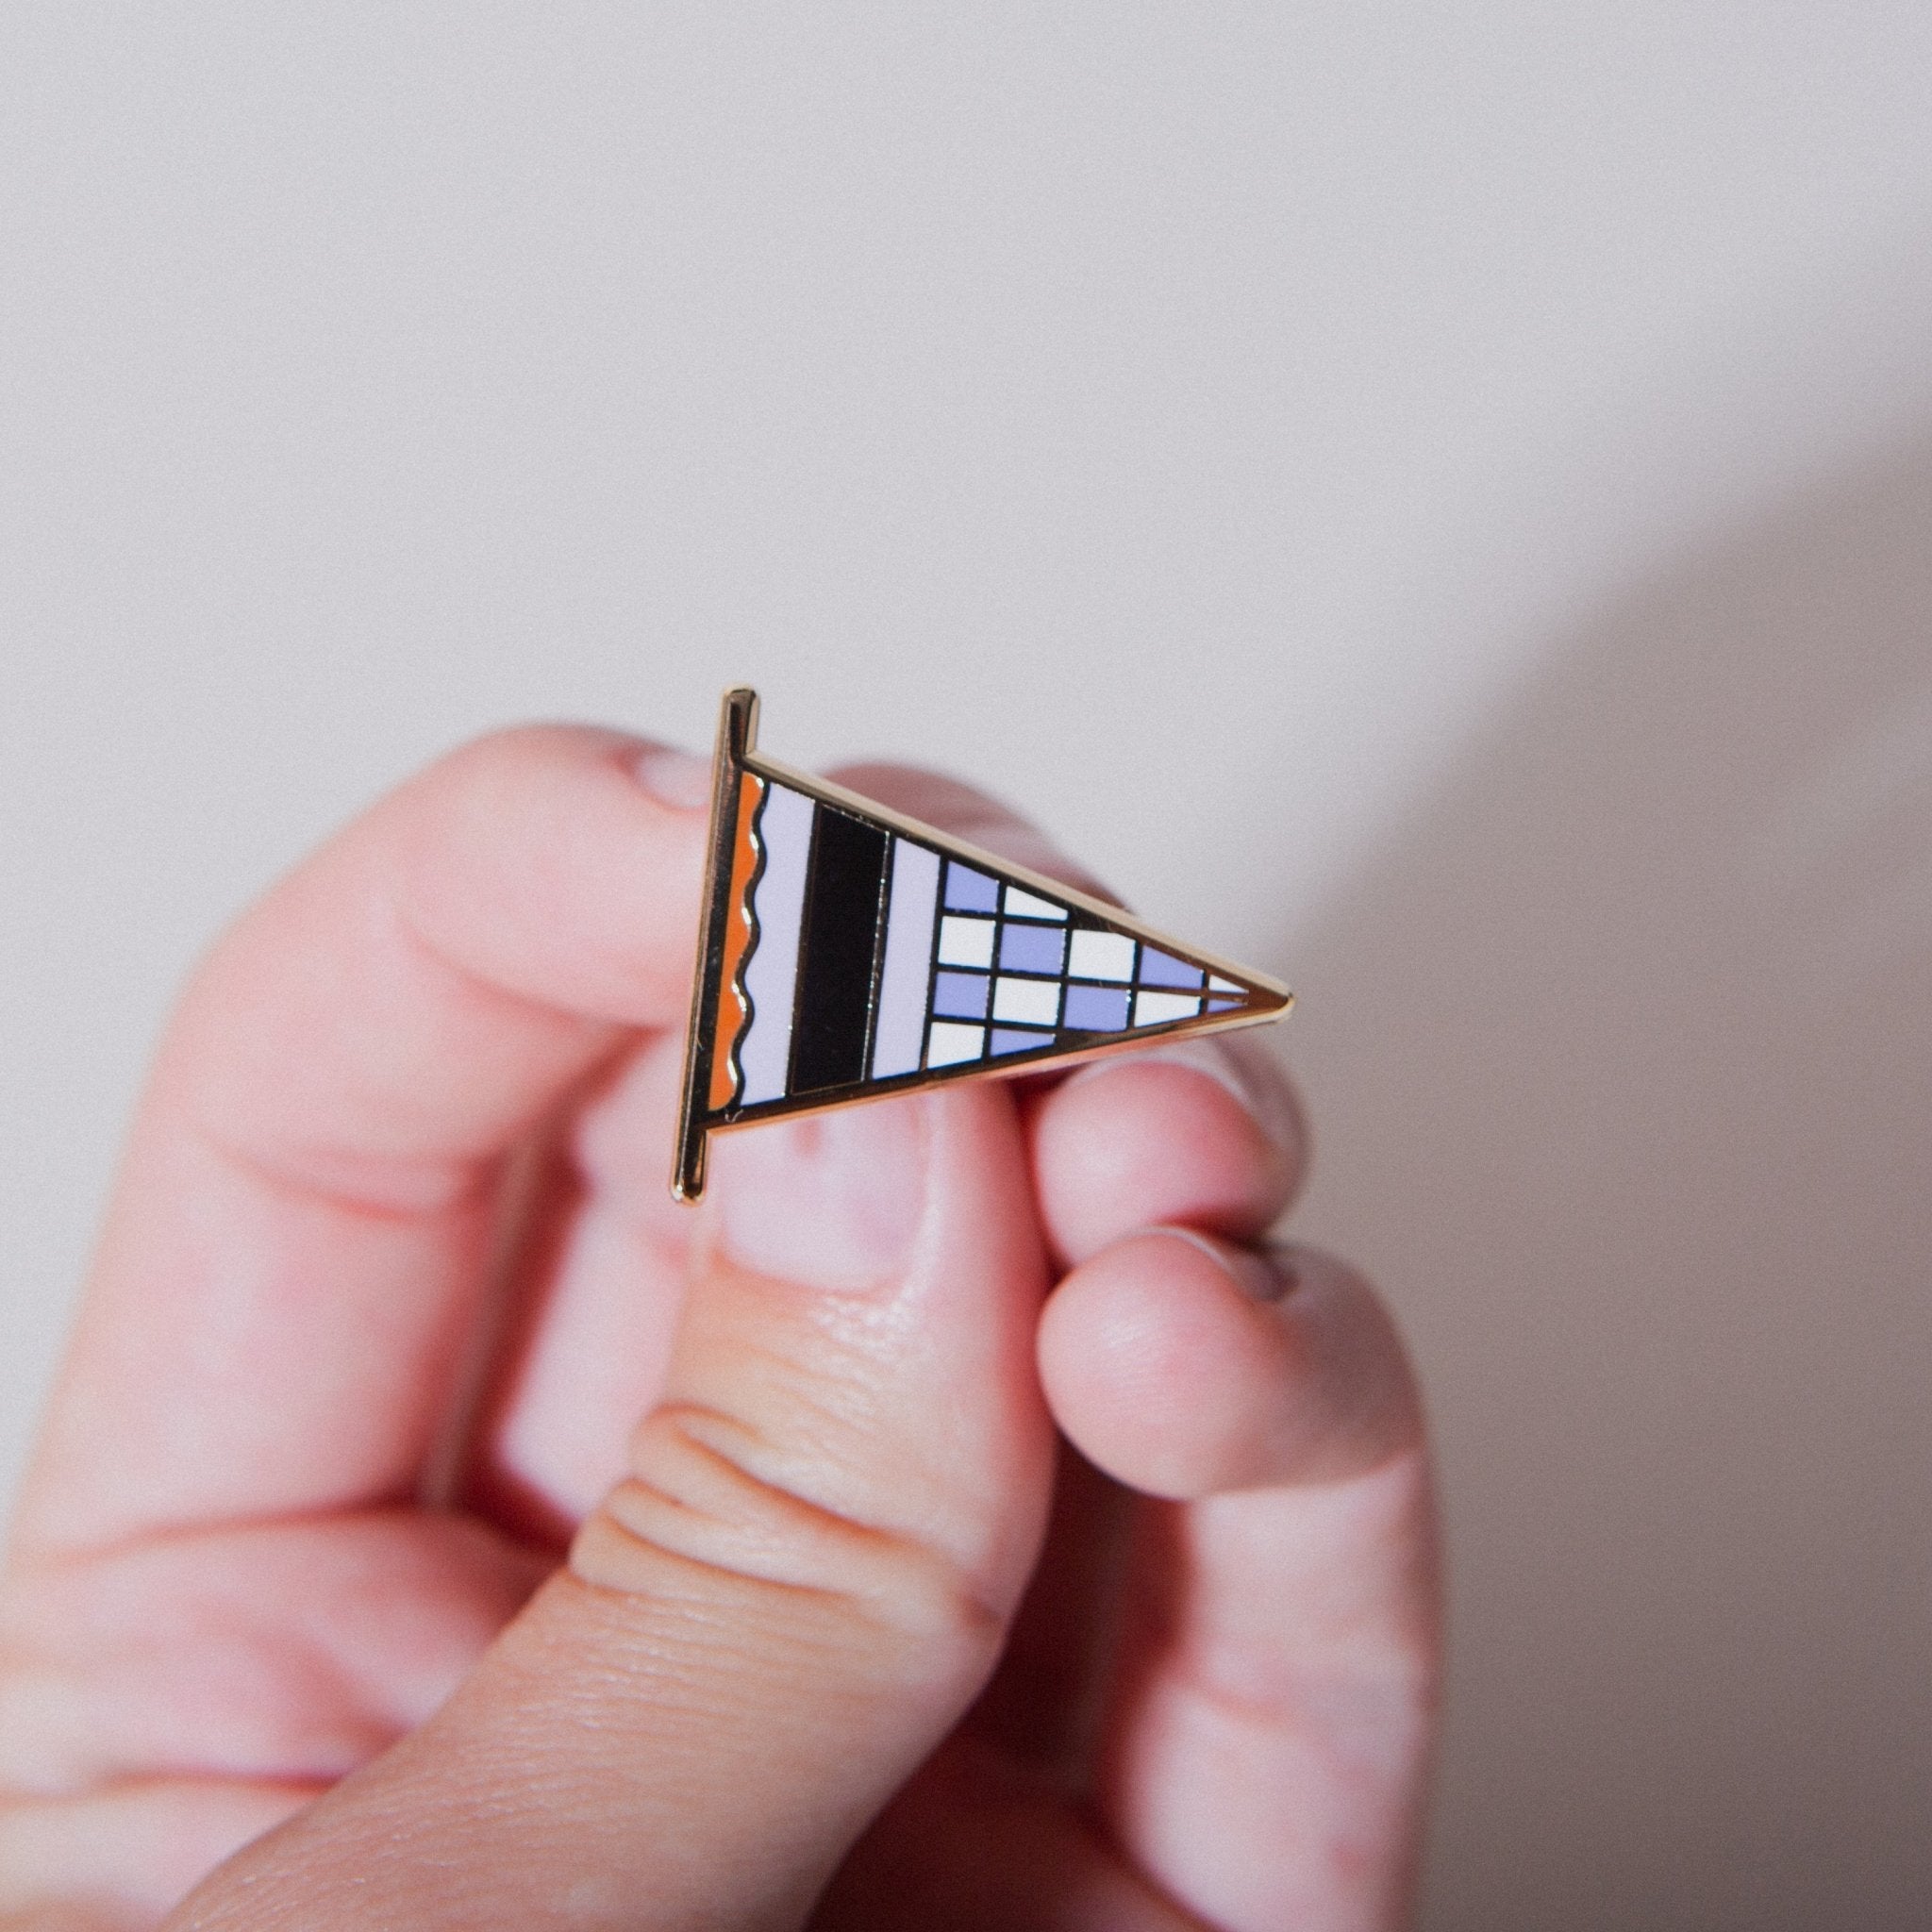 Checkered Pennant Pin - Case Study